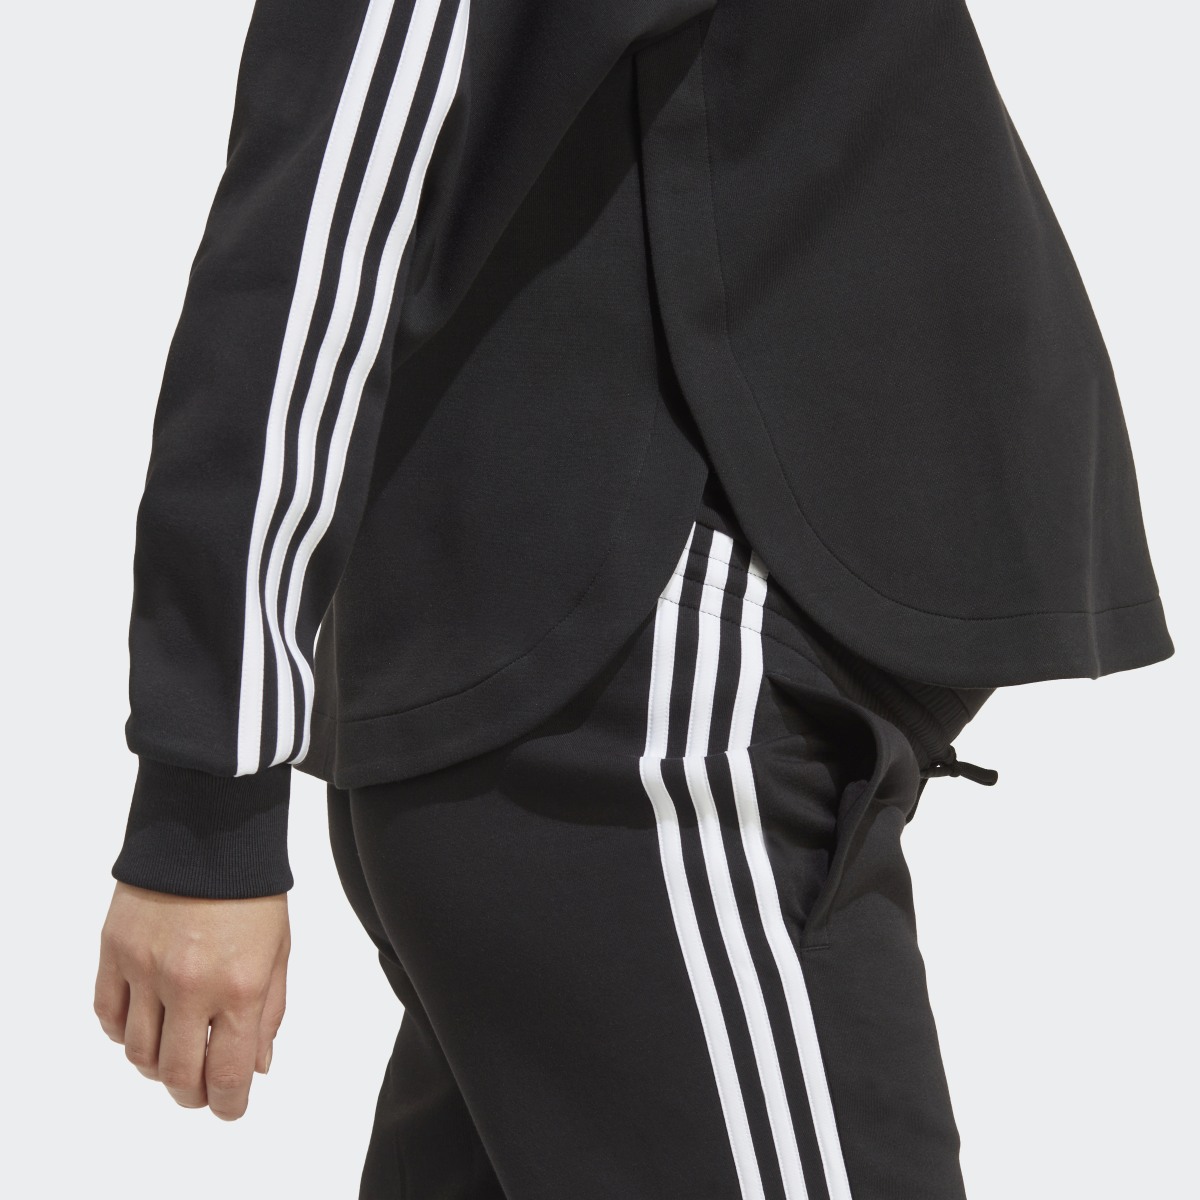 Adidas Maternity Over-the-Head Hoodie. 7